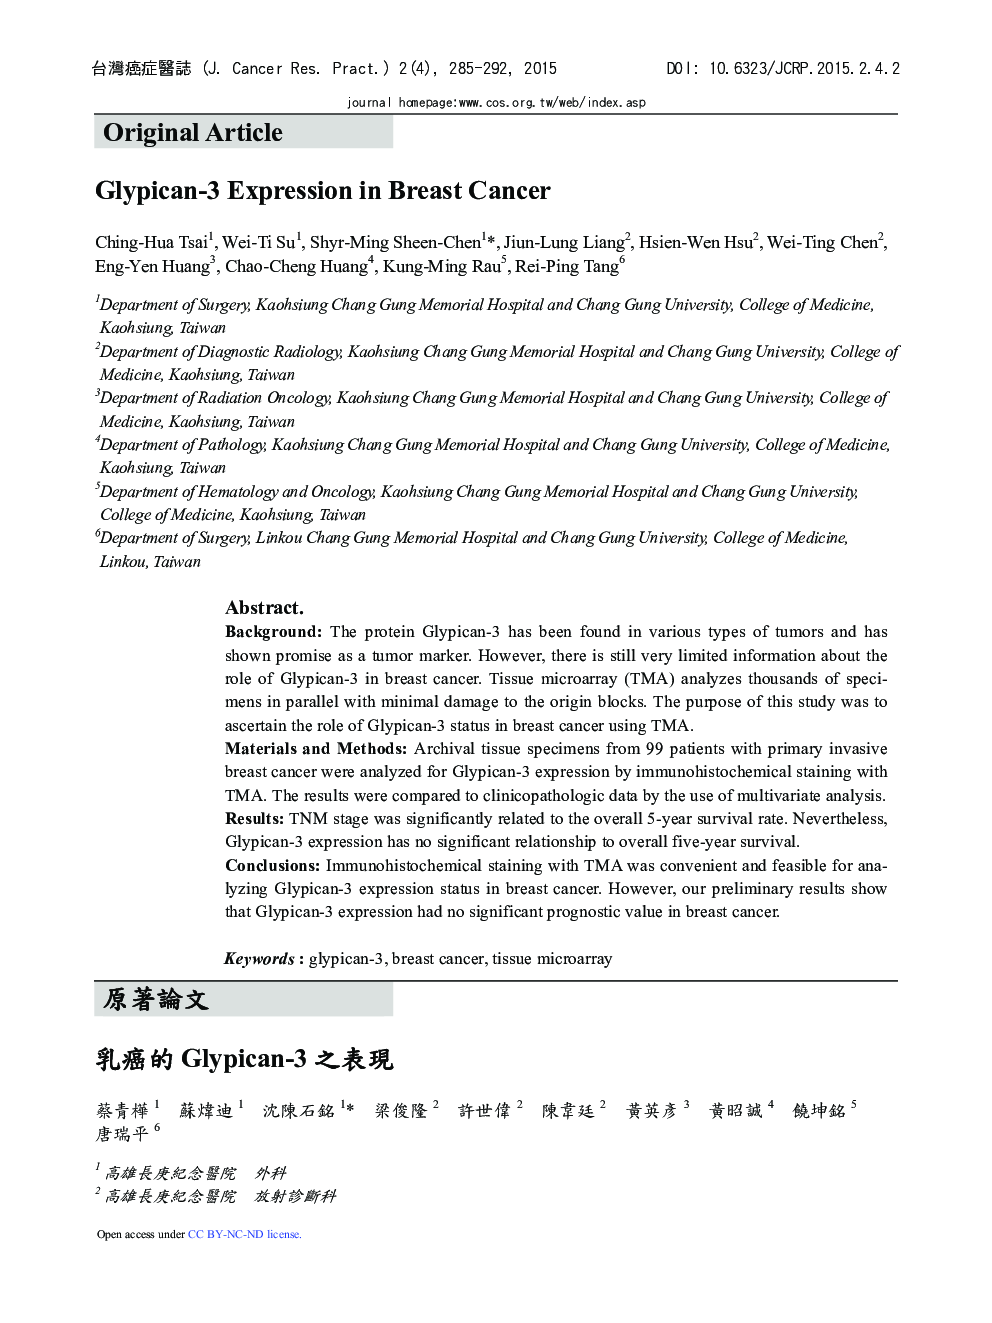 Glypican-3 Expression in Breast Cancer